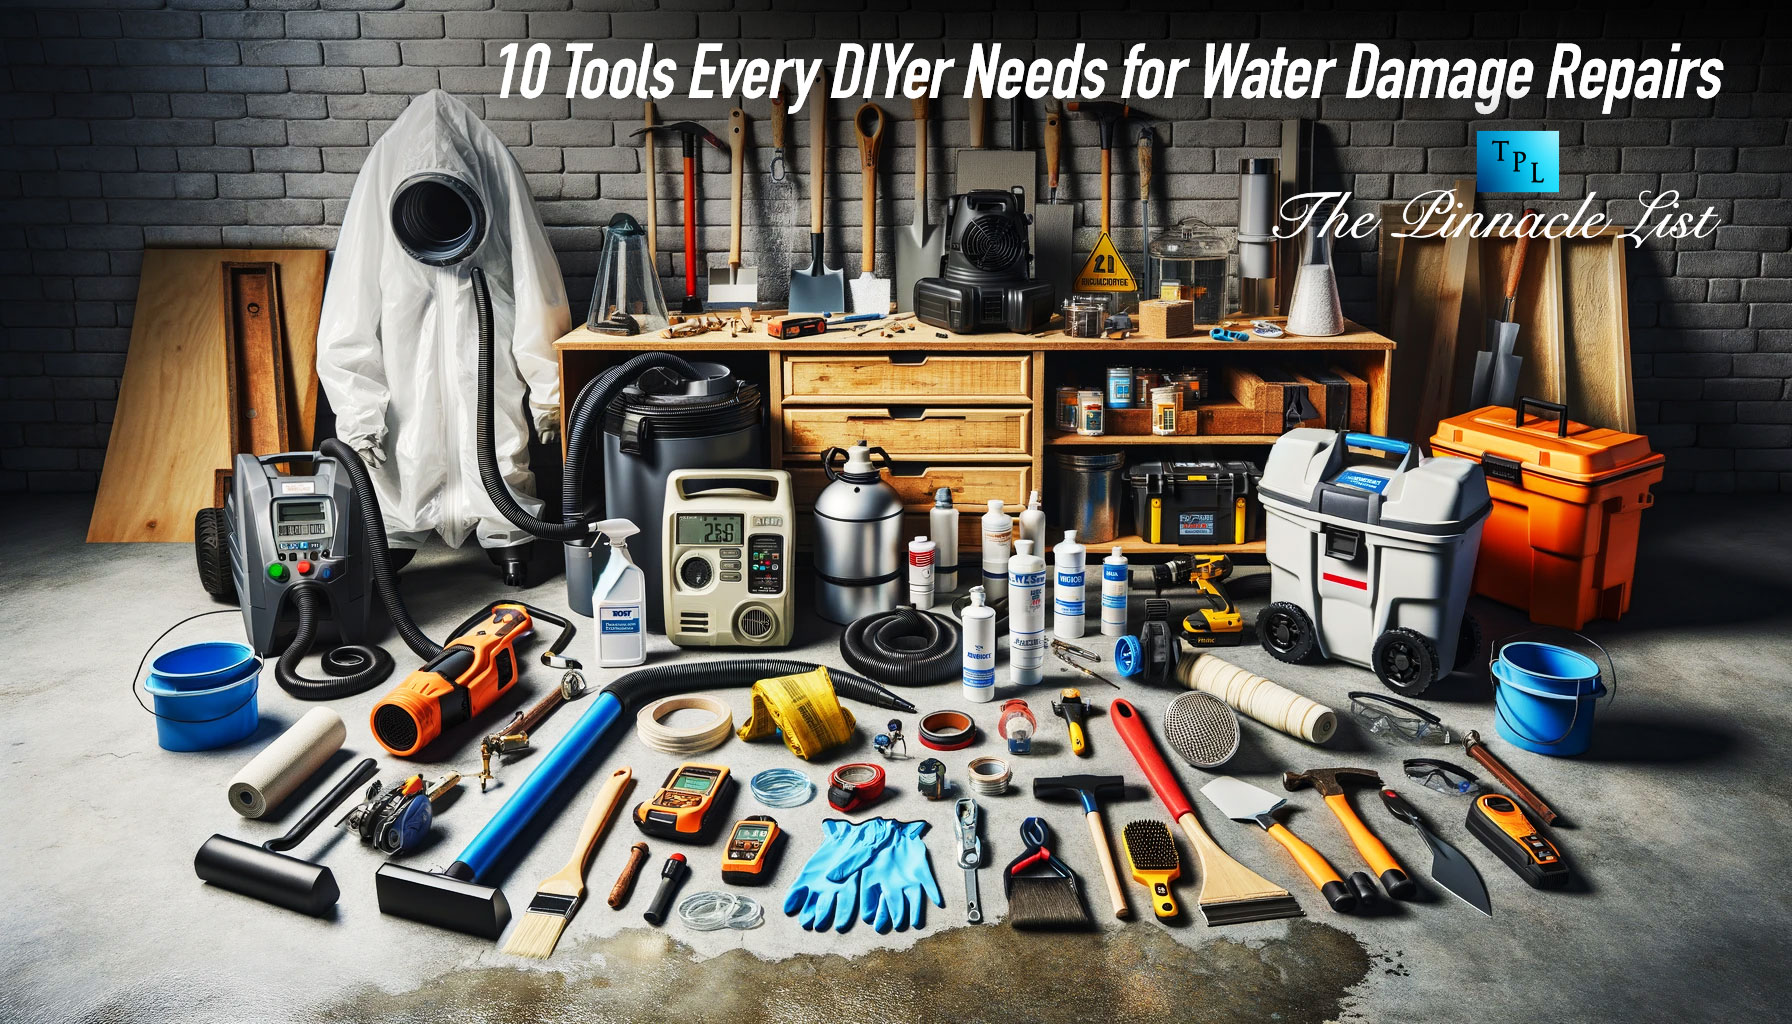 10 Tools Every DIYer Needs for Water Damage Repairs